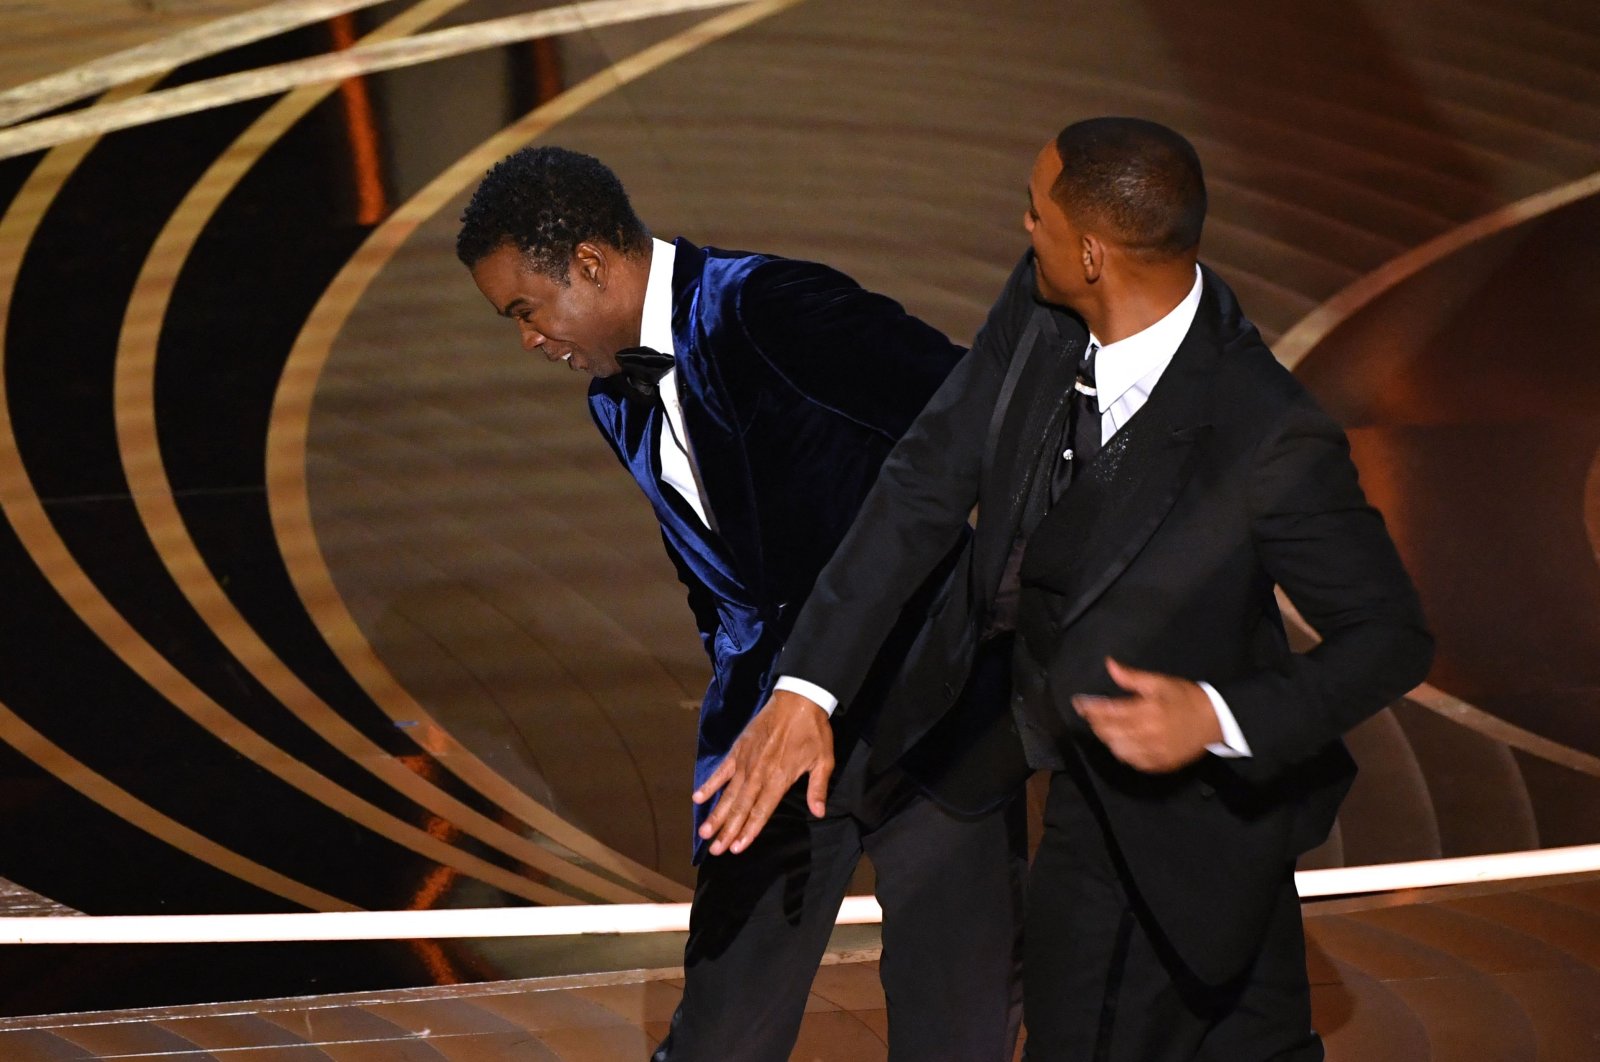 Will Smith (R) slaps Chris Rock onstage during the 94th Oscars at the Dolby Theater in Hollywood, California, U.S., March 27, 2022. (AFP File Photo)